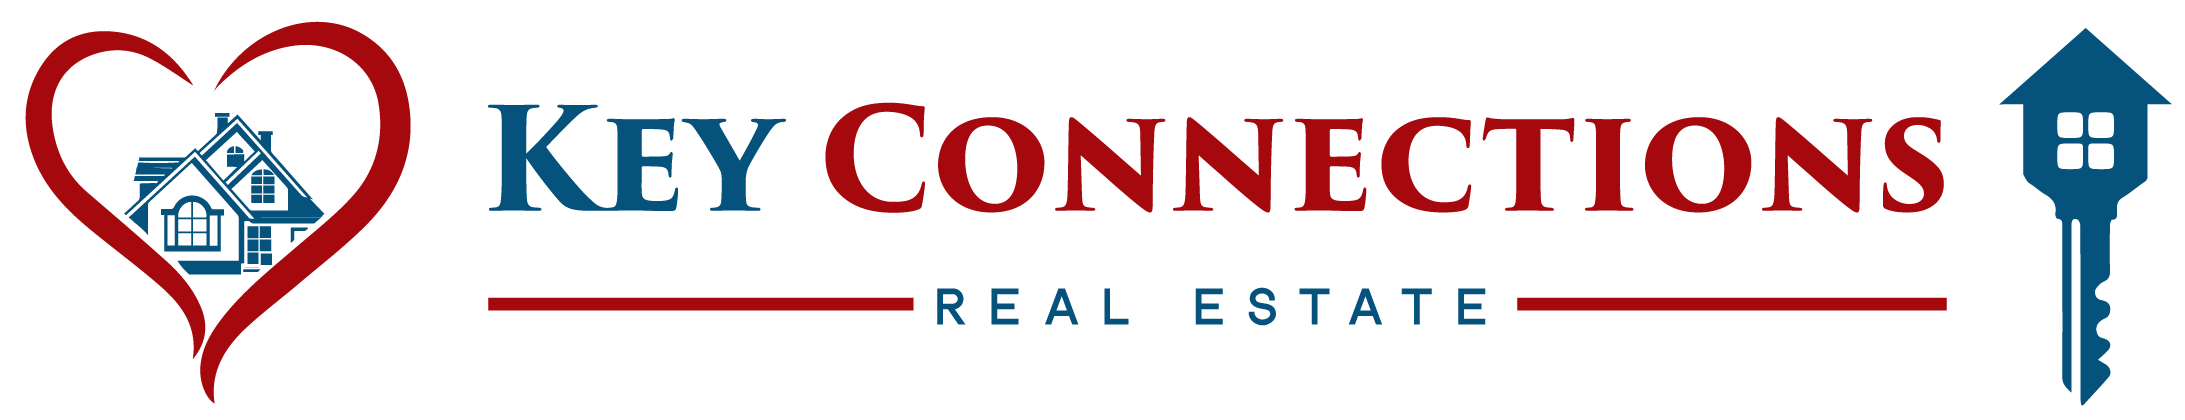 Key Connections Real Estate